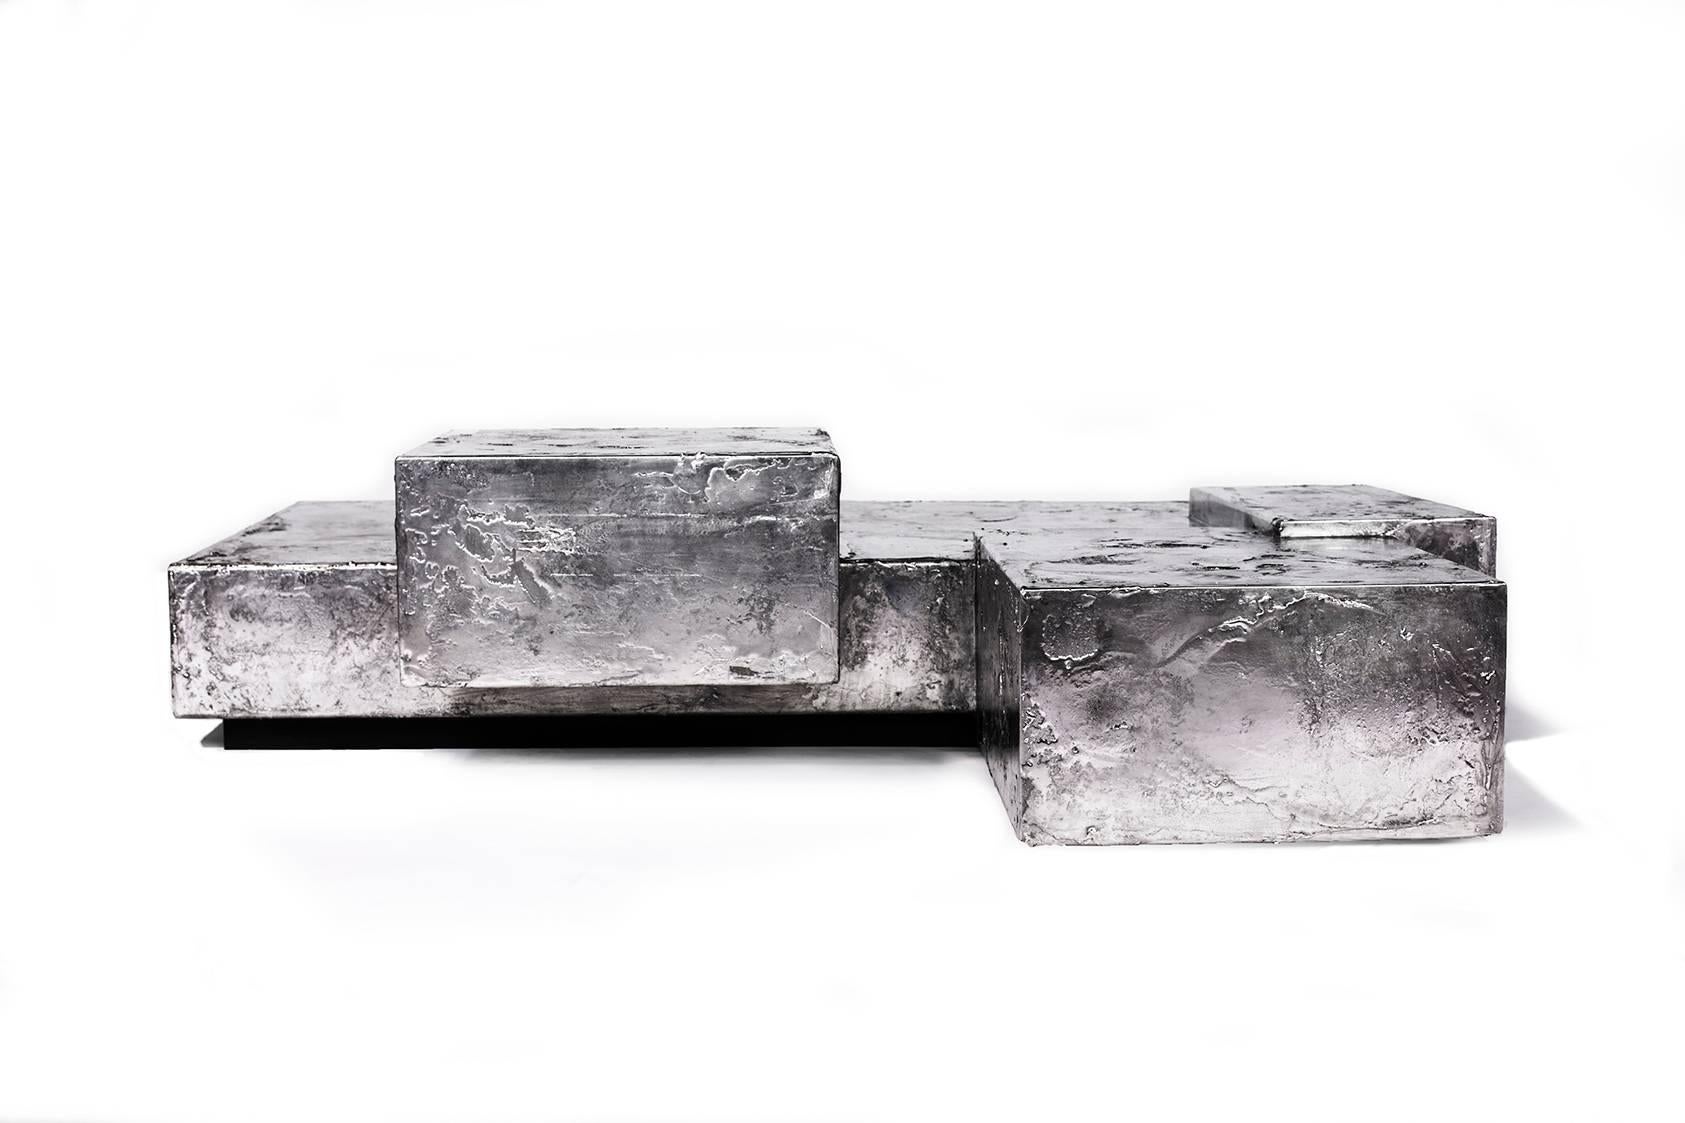 The Pewter collection is a family of furniture pieces defined by their materiality and formal qualities. One Crucible at a time, pewter is melted into liquid form and hand coated onto the steel structure, creating the other-worldly surface that